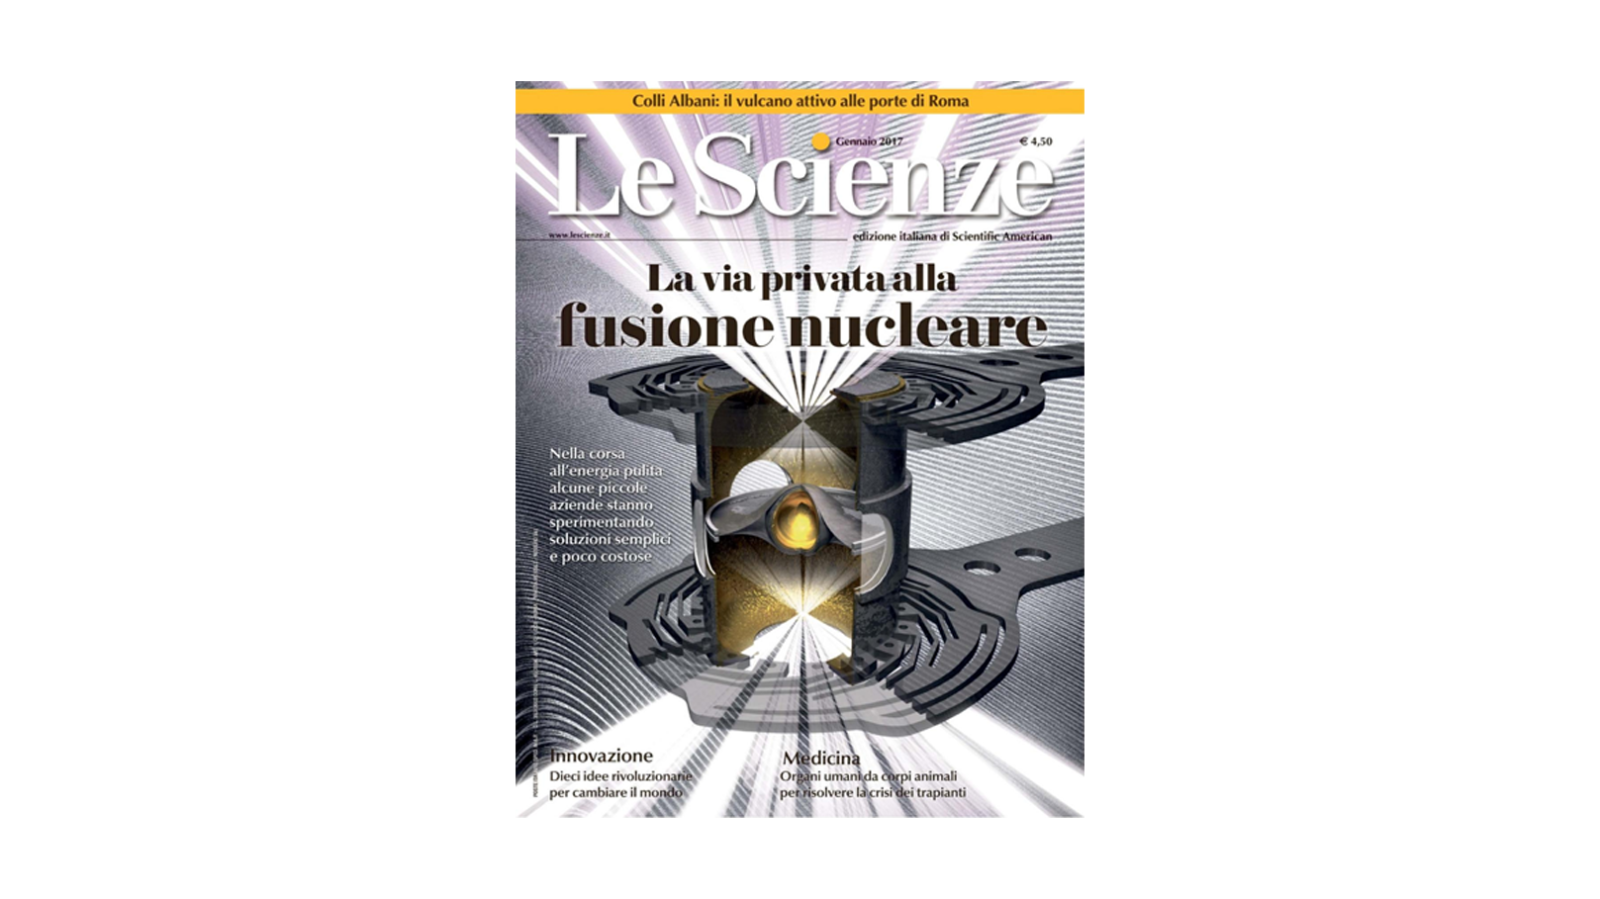 Private fusion companies on the cover of Le Scienze